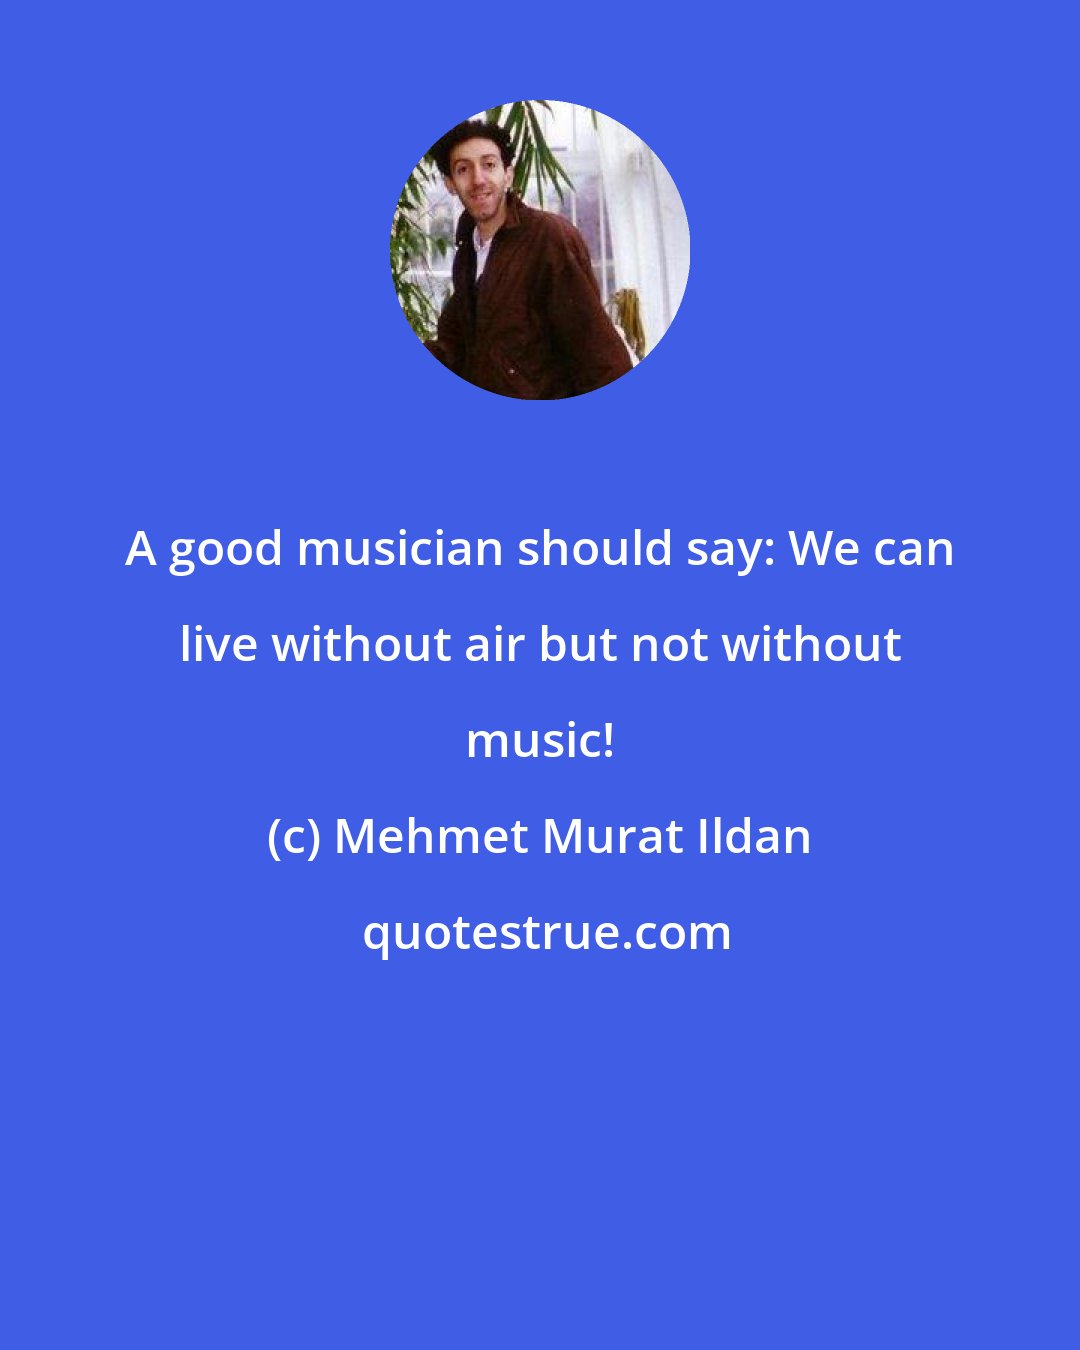 Mehmet Murat Ildan: A good musician should say: We can live without air but not without music!